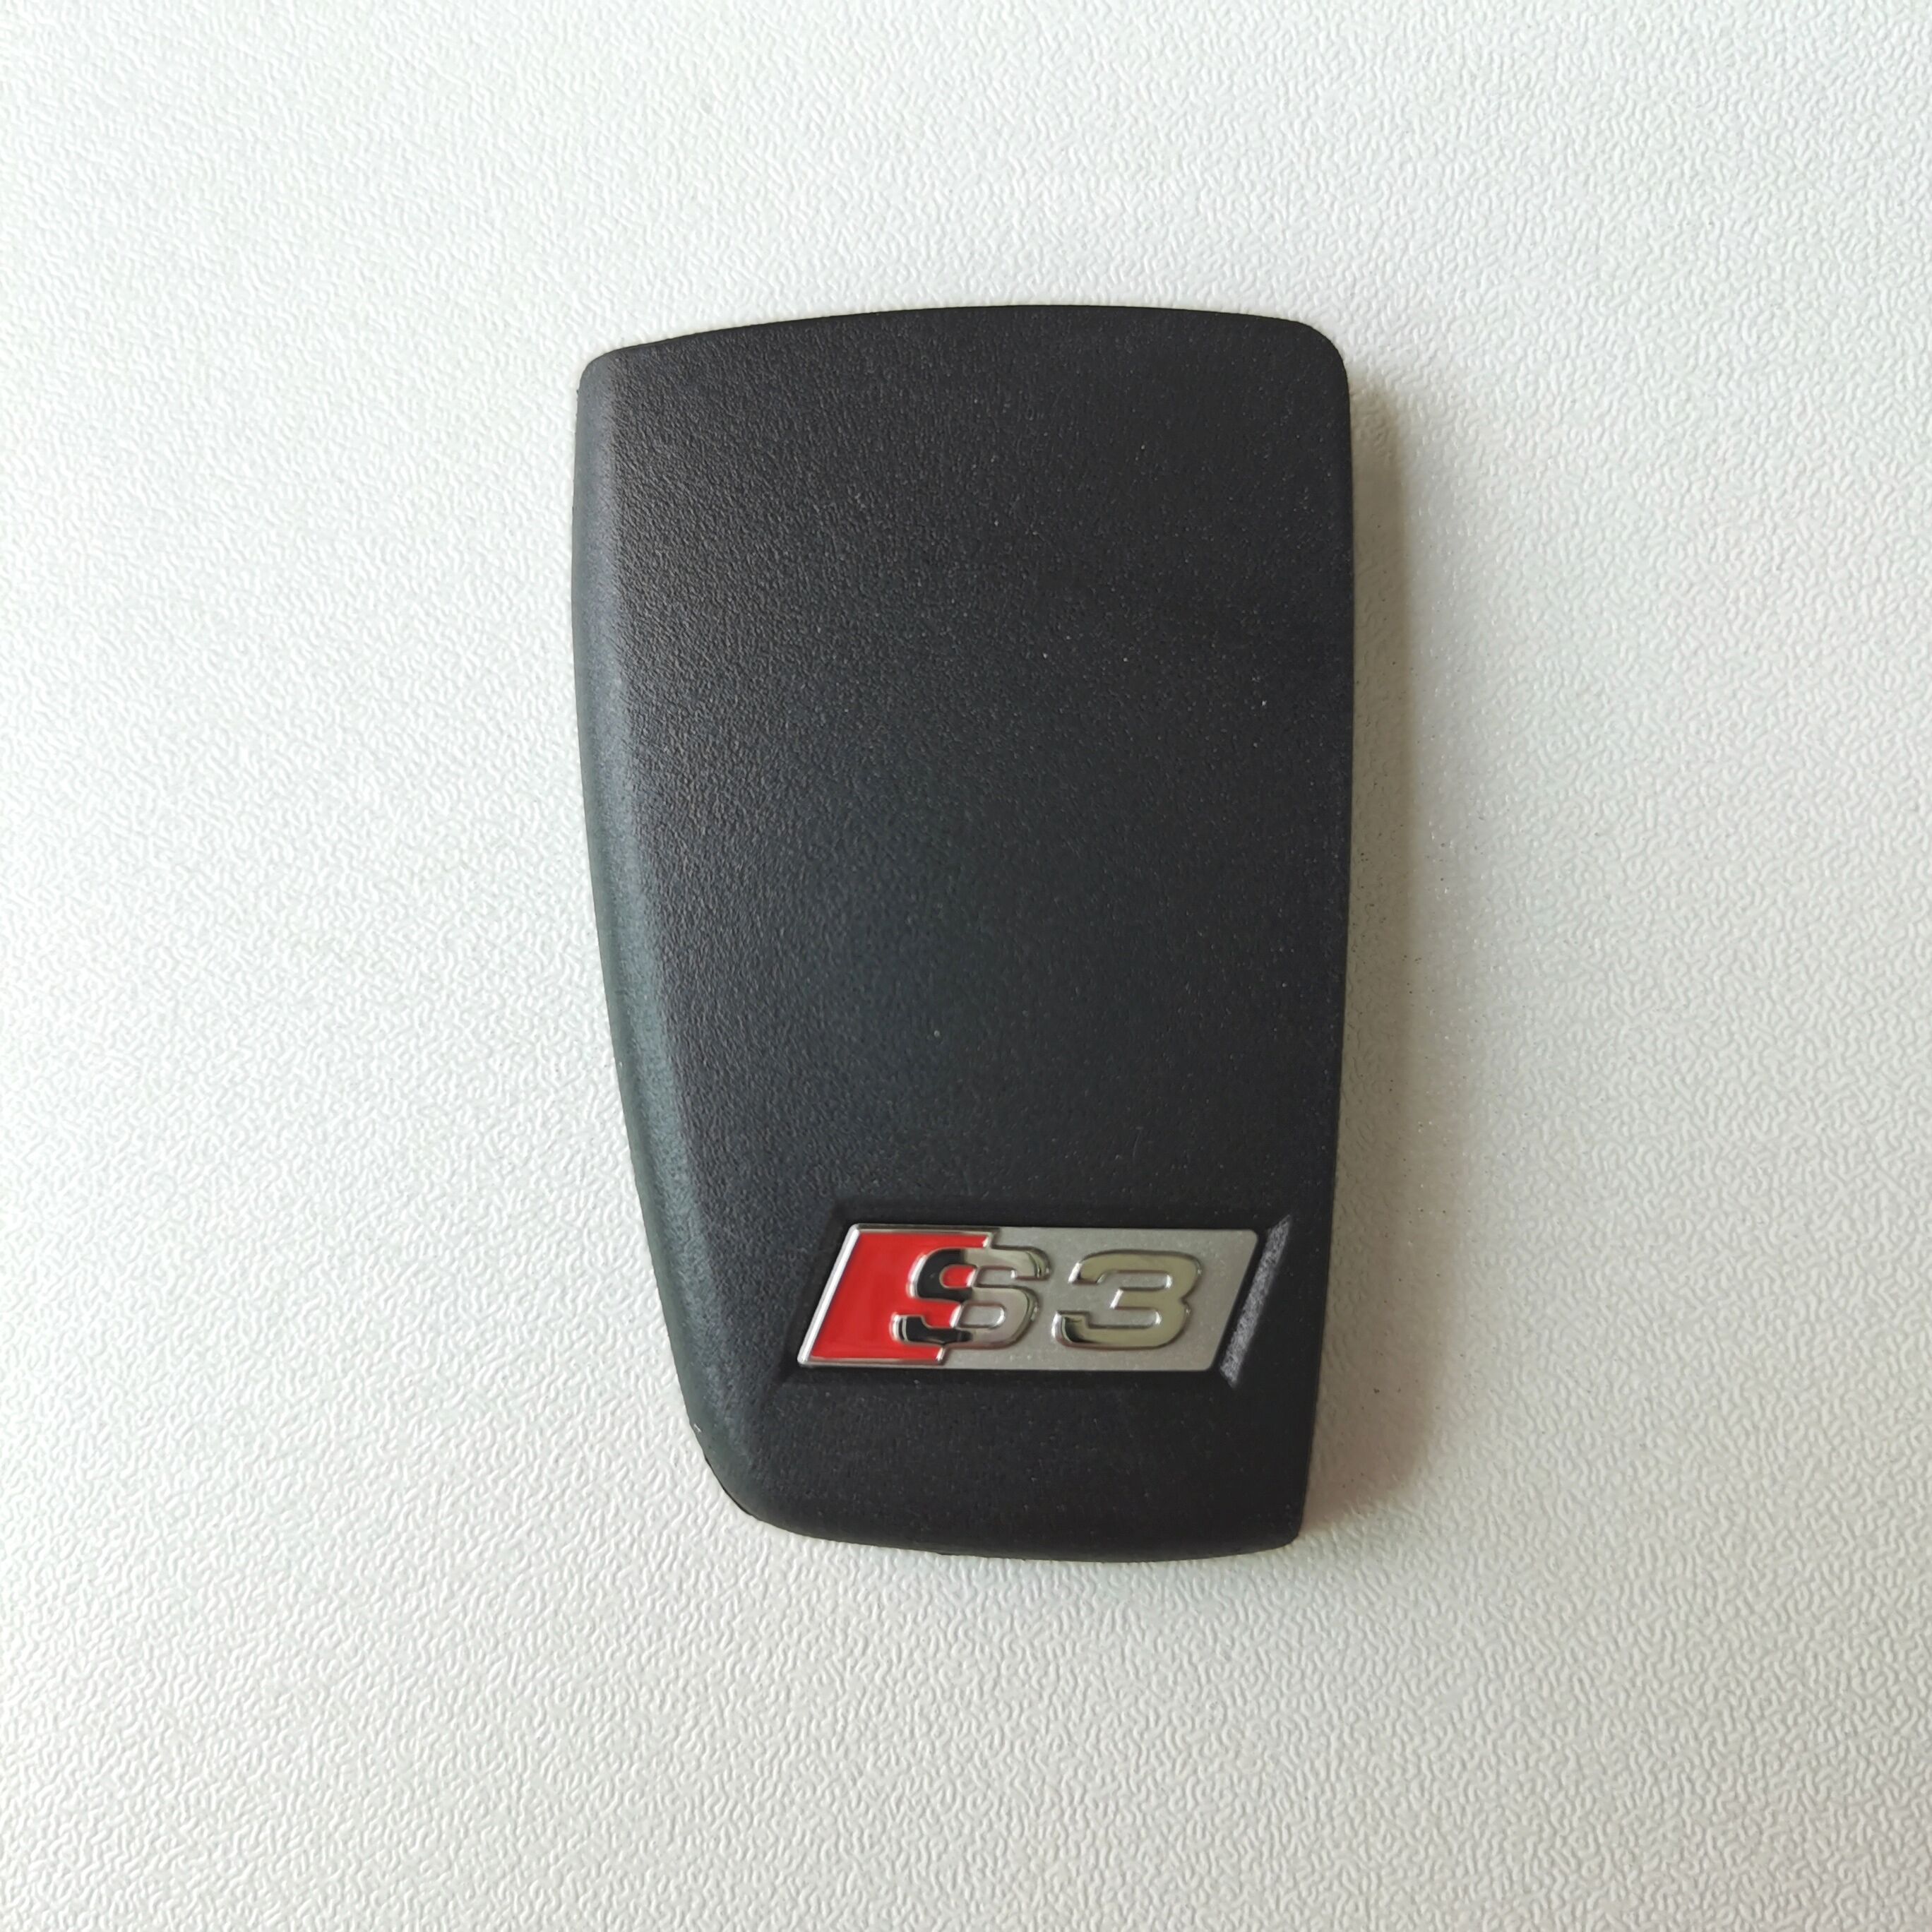 Suitable for Audi A3 Q3 A6L Q7 TT Key Shell S3 S6 RS Key Shell Back Cover Replacement S3 B Type